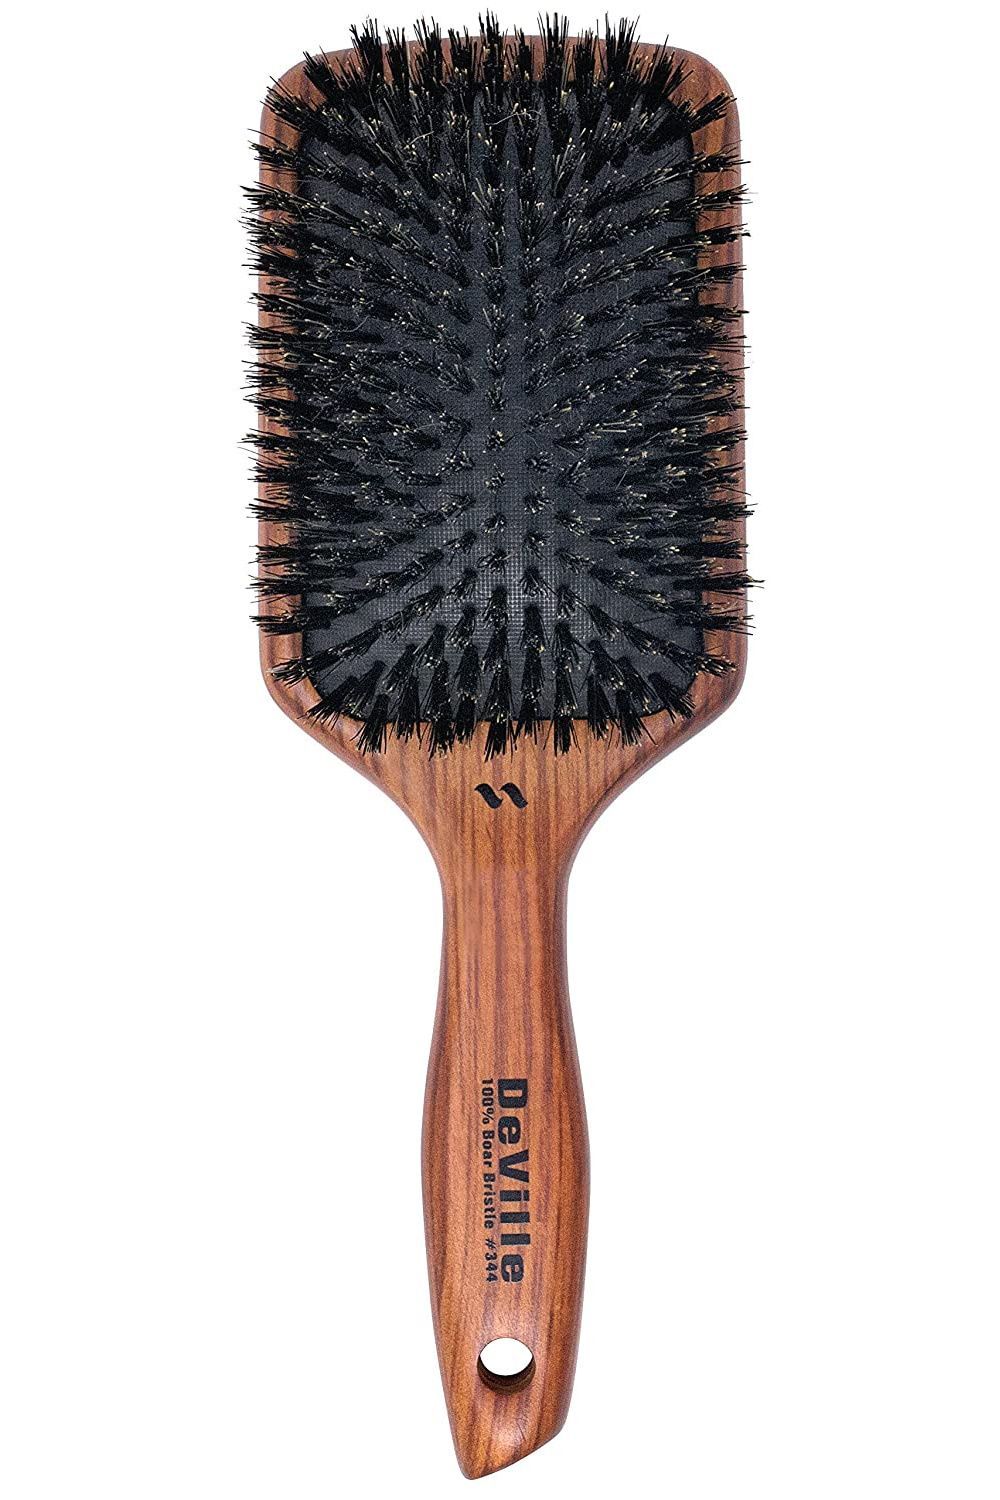 Buy GranNaturals Boar Bristle Paddle Hair Brush Wooden Handle for All Hair  Types Online at Low Prices in India  Amazonin